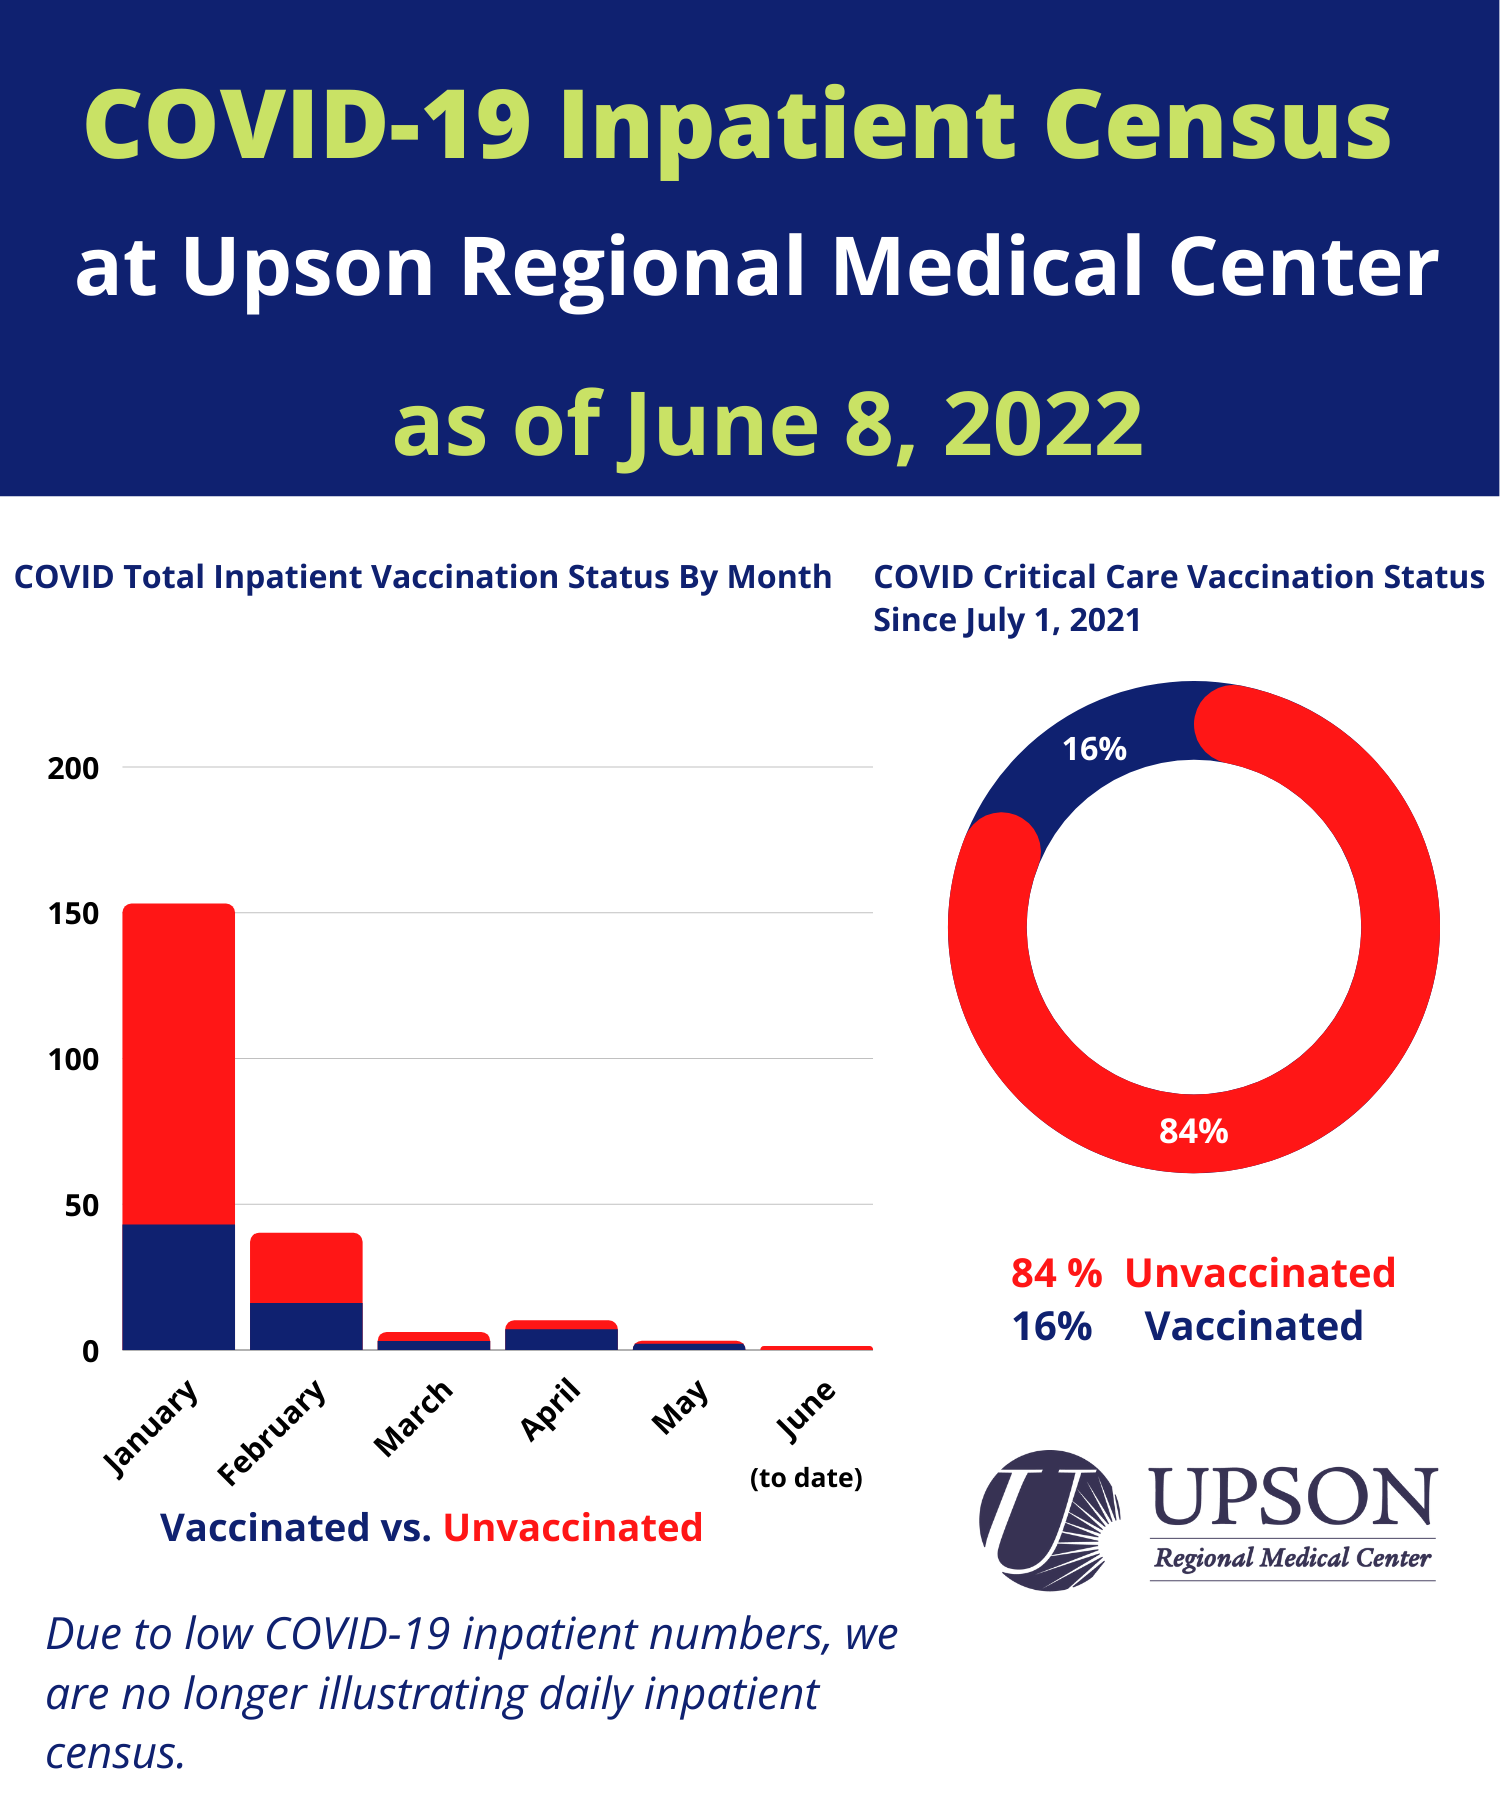 Photo for URMC COVID Patients as of June 8, 2022